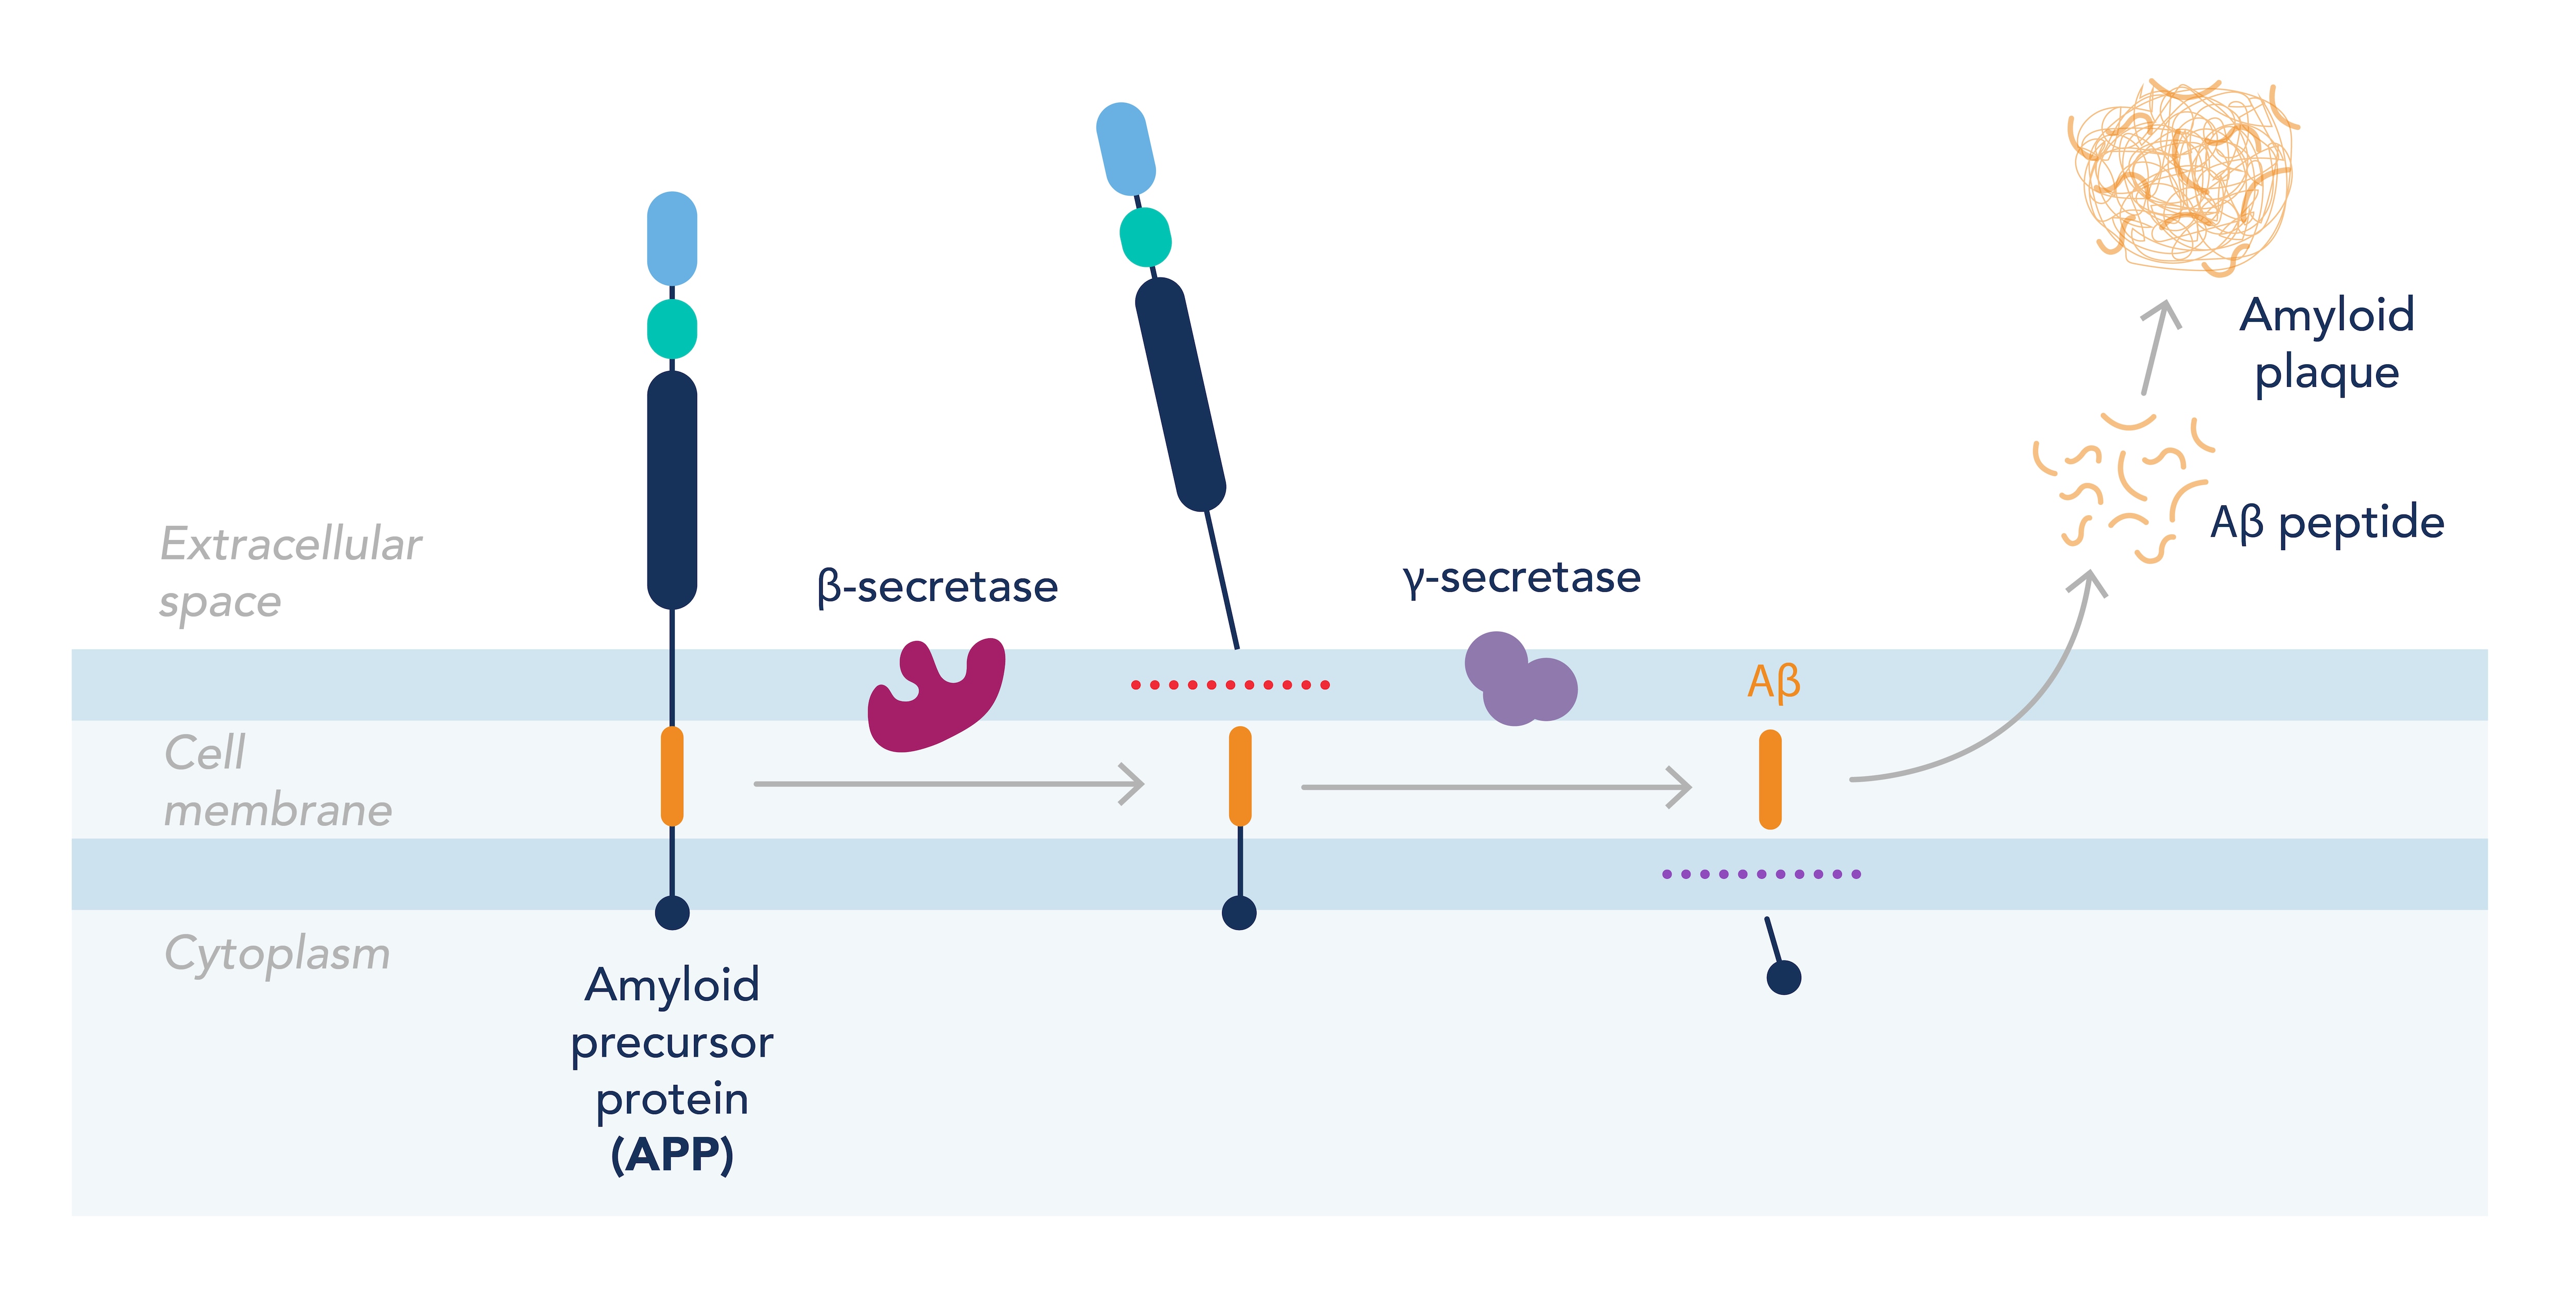 Diagram detailing how APP leads to amyloid plaque formation in Alzheimer’s disease.